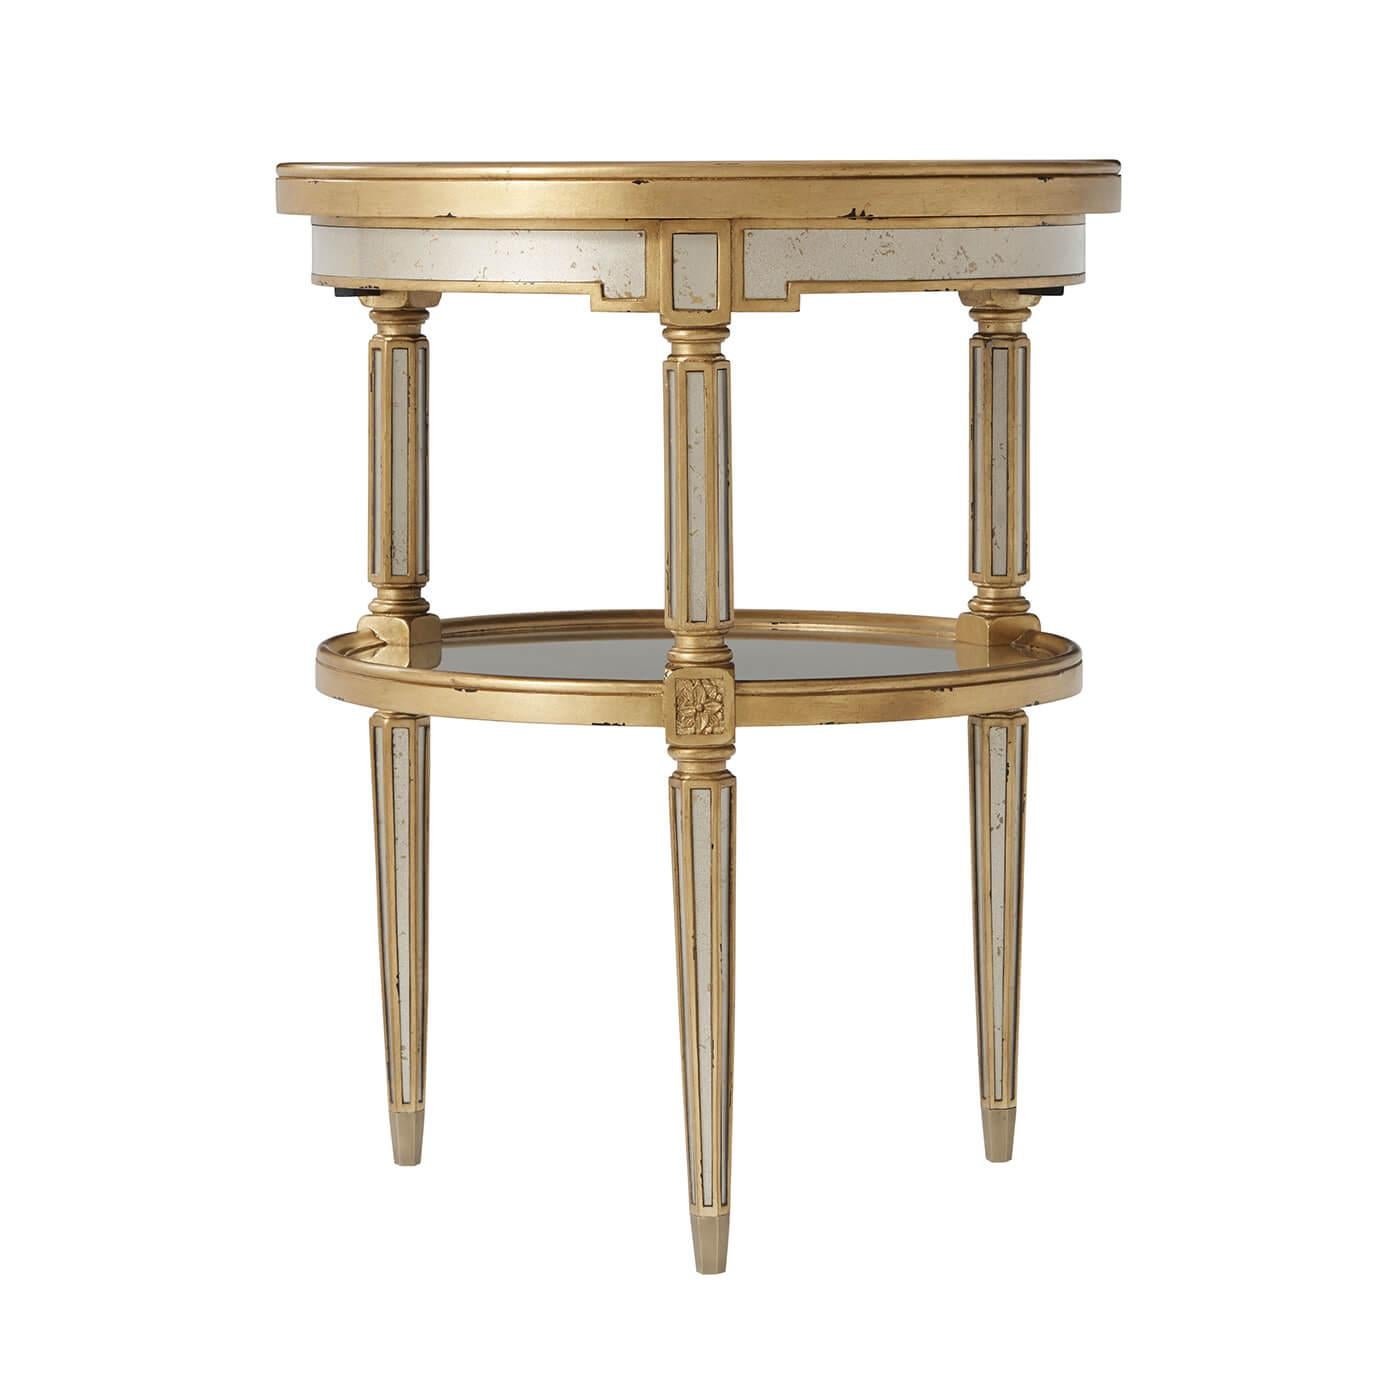 An Art Deco style silvered and gilt verre Eglomise two-tier circular table, the dished and molded edge top above a similar under tier, joined by octagonal section supports, on tapering legs. 

Dimensions: 23